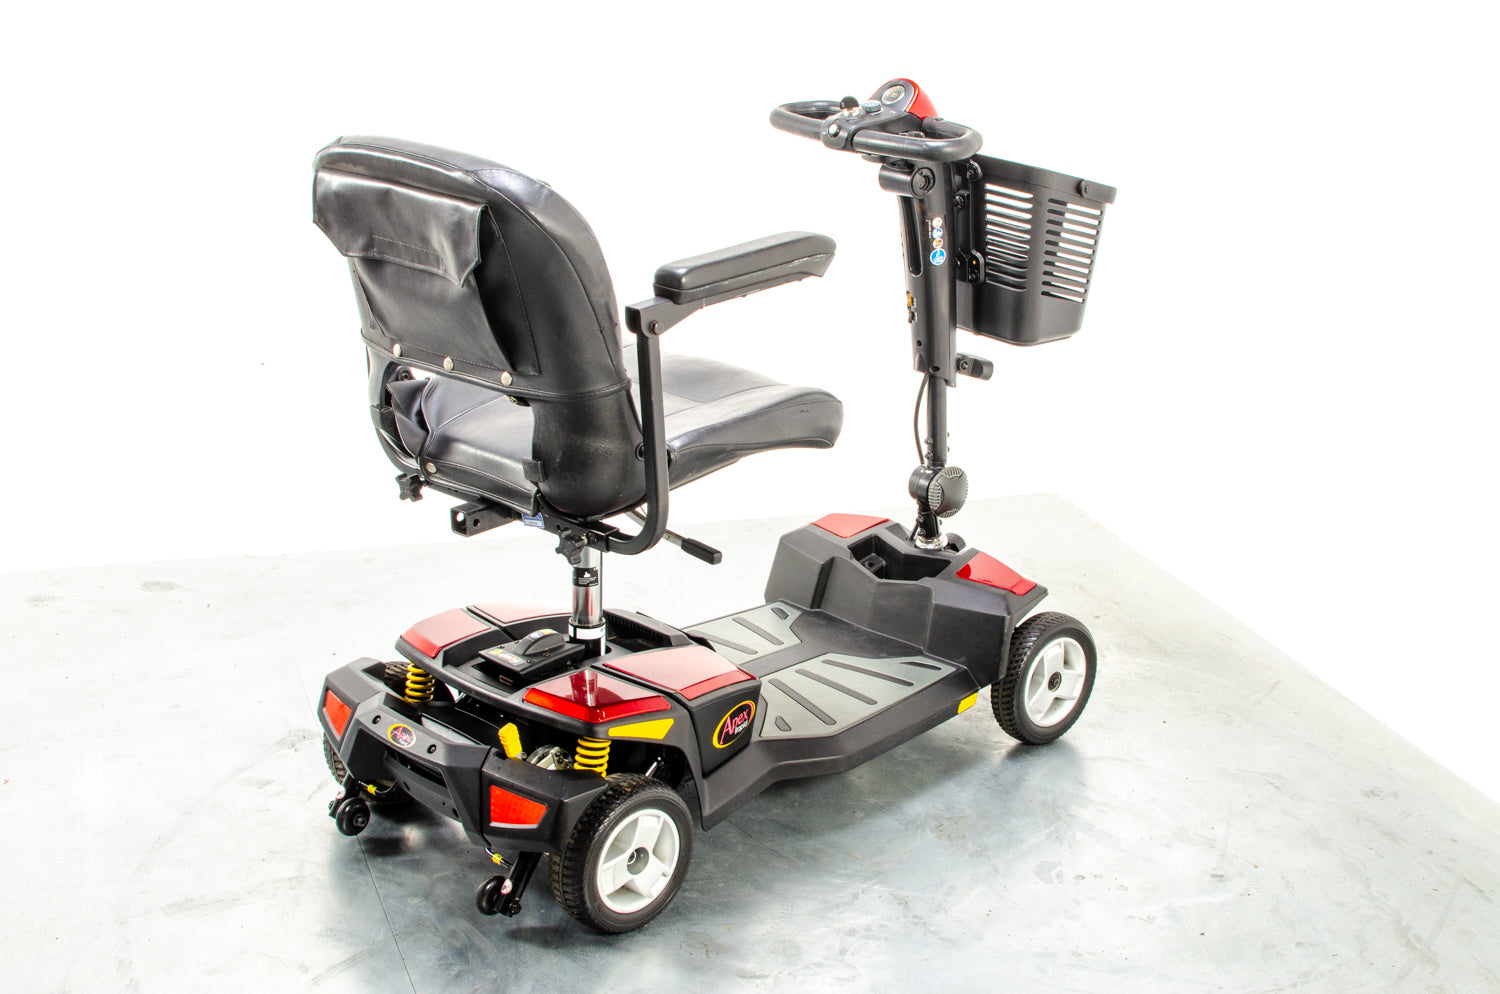 Pride Apex Rapid Used Mobility Scooter Small Transportable Boot Portable Folding